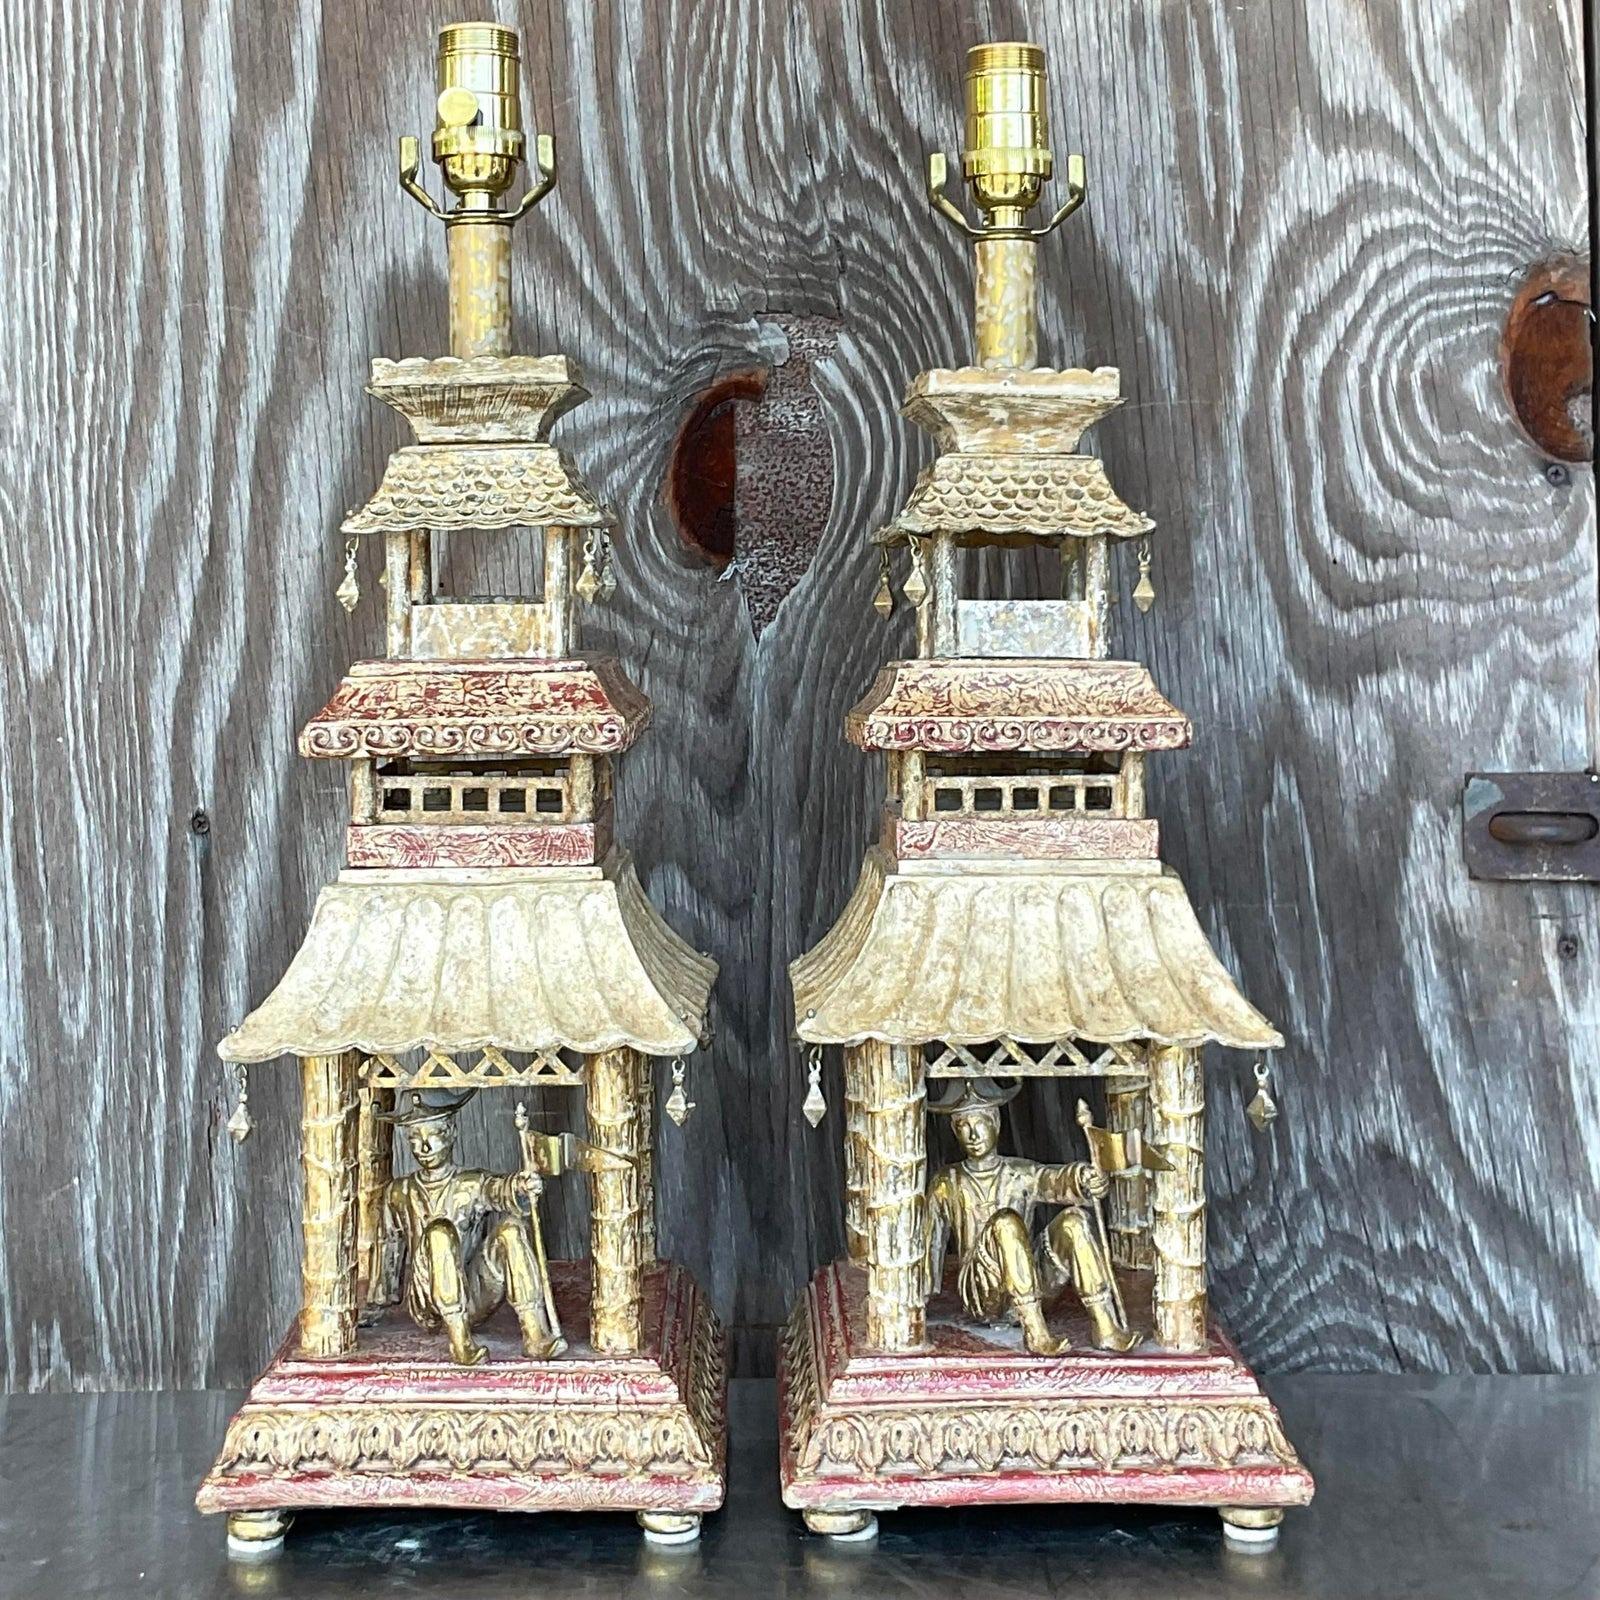 North American Vintage Regency Hand Painted Pagoda Lamps - a Pair